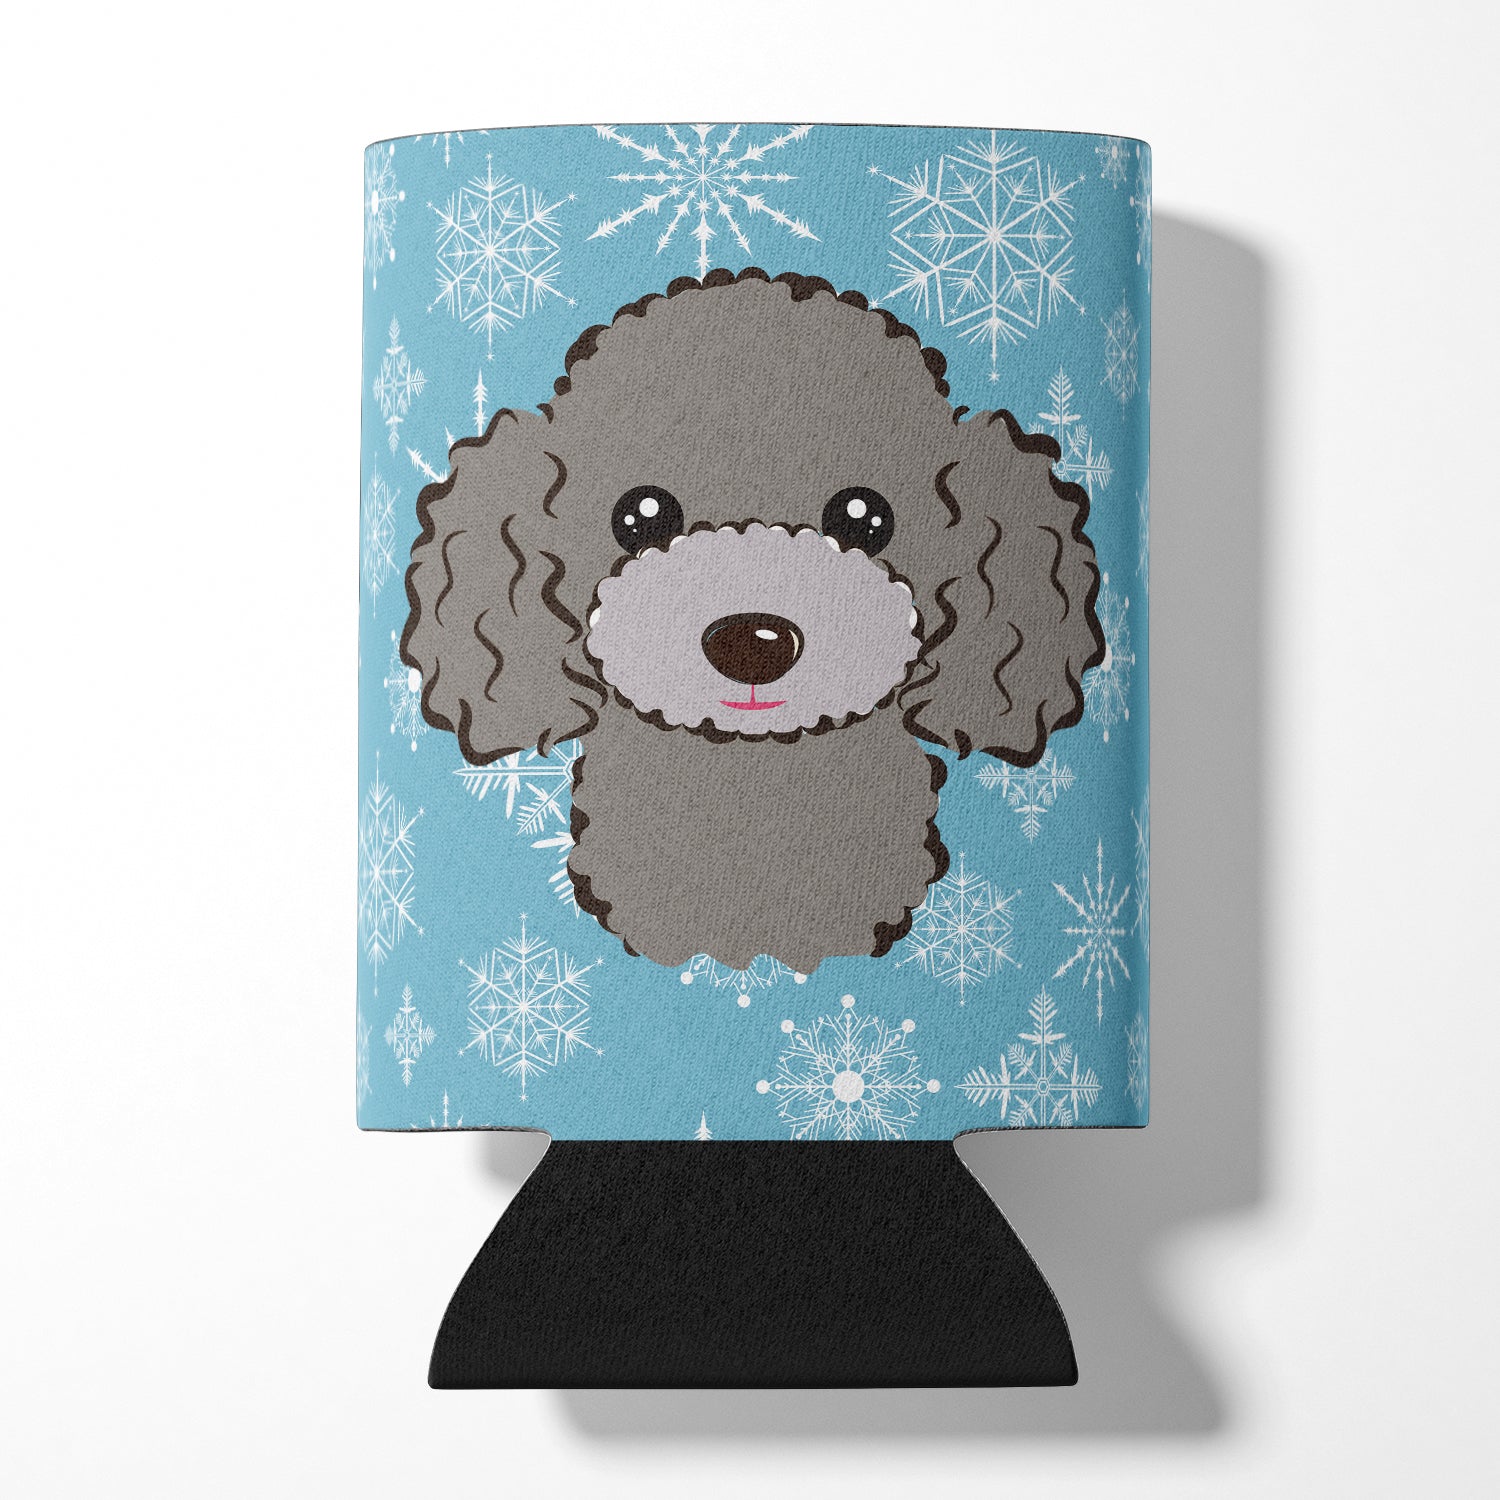 Snowflake Silver Gray Poodle Can or Bottle Hugger BB1693CC